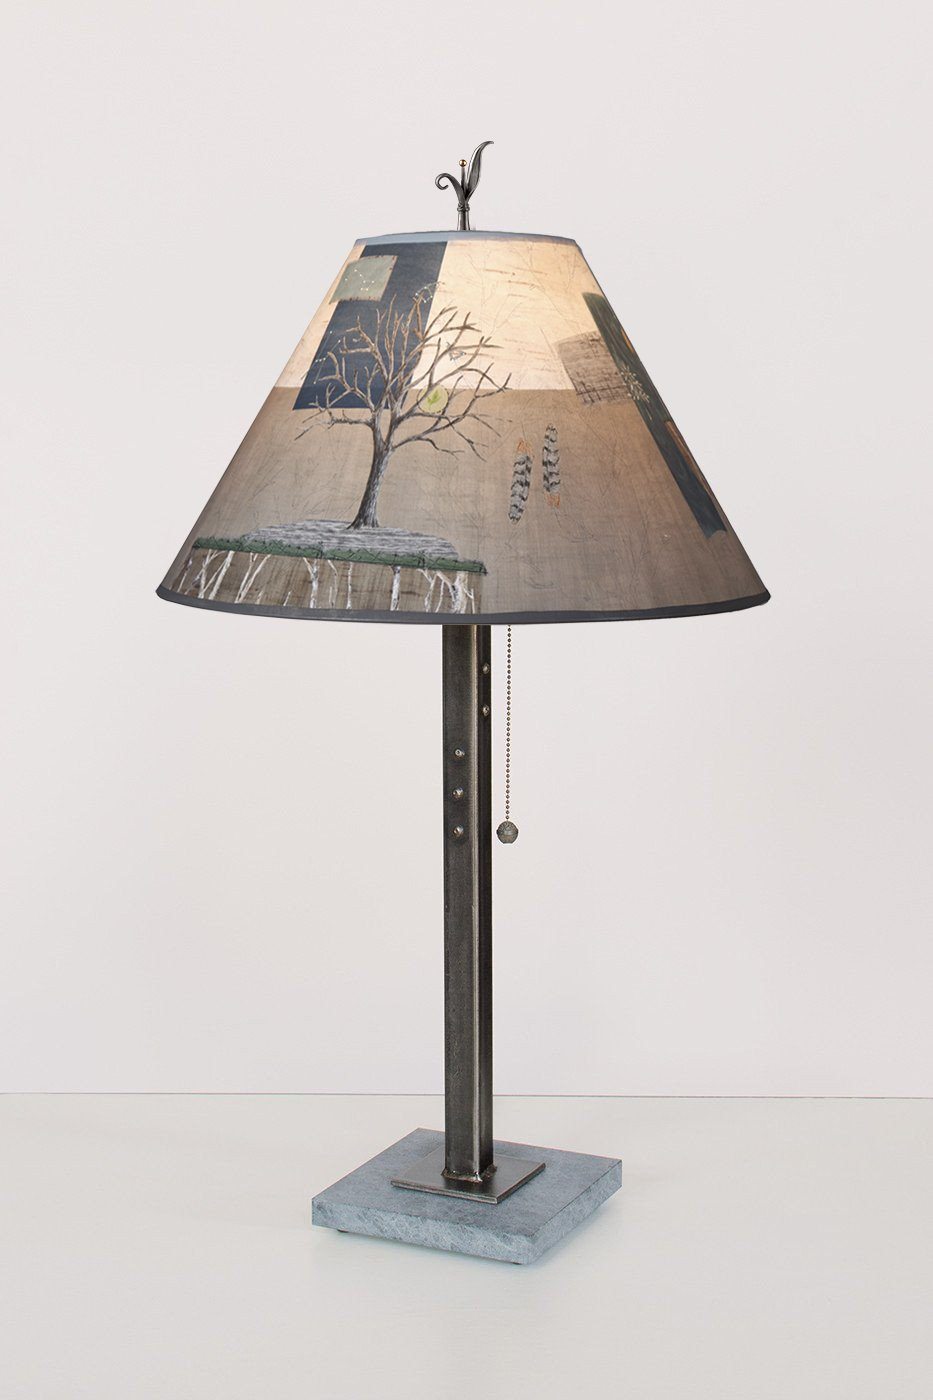 Janna Ugone &amp; Co Table Lamps Steel Table Lamp with Medium Conical Shade in Wander in Drift